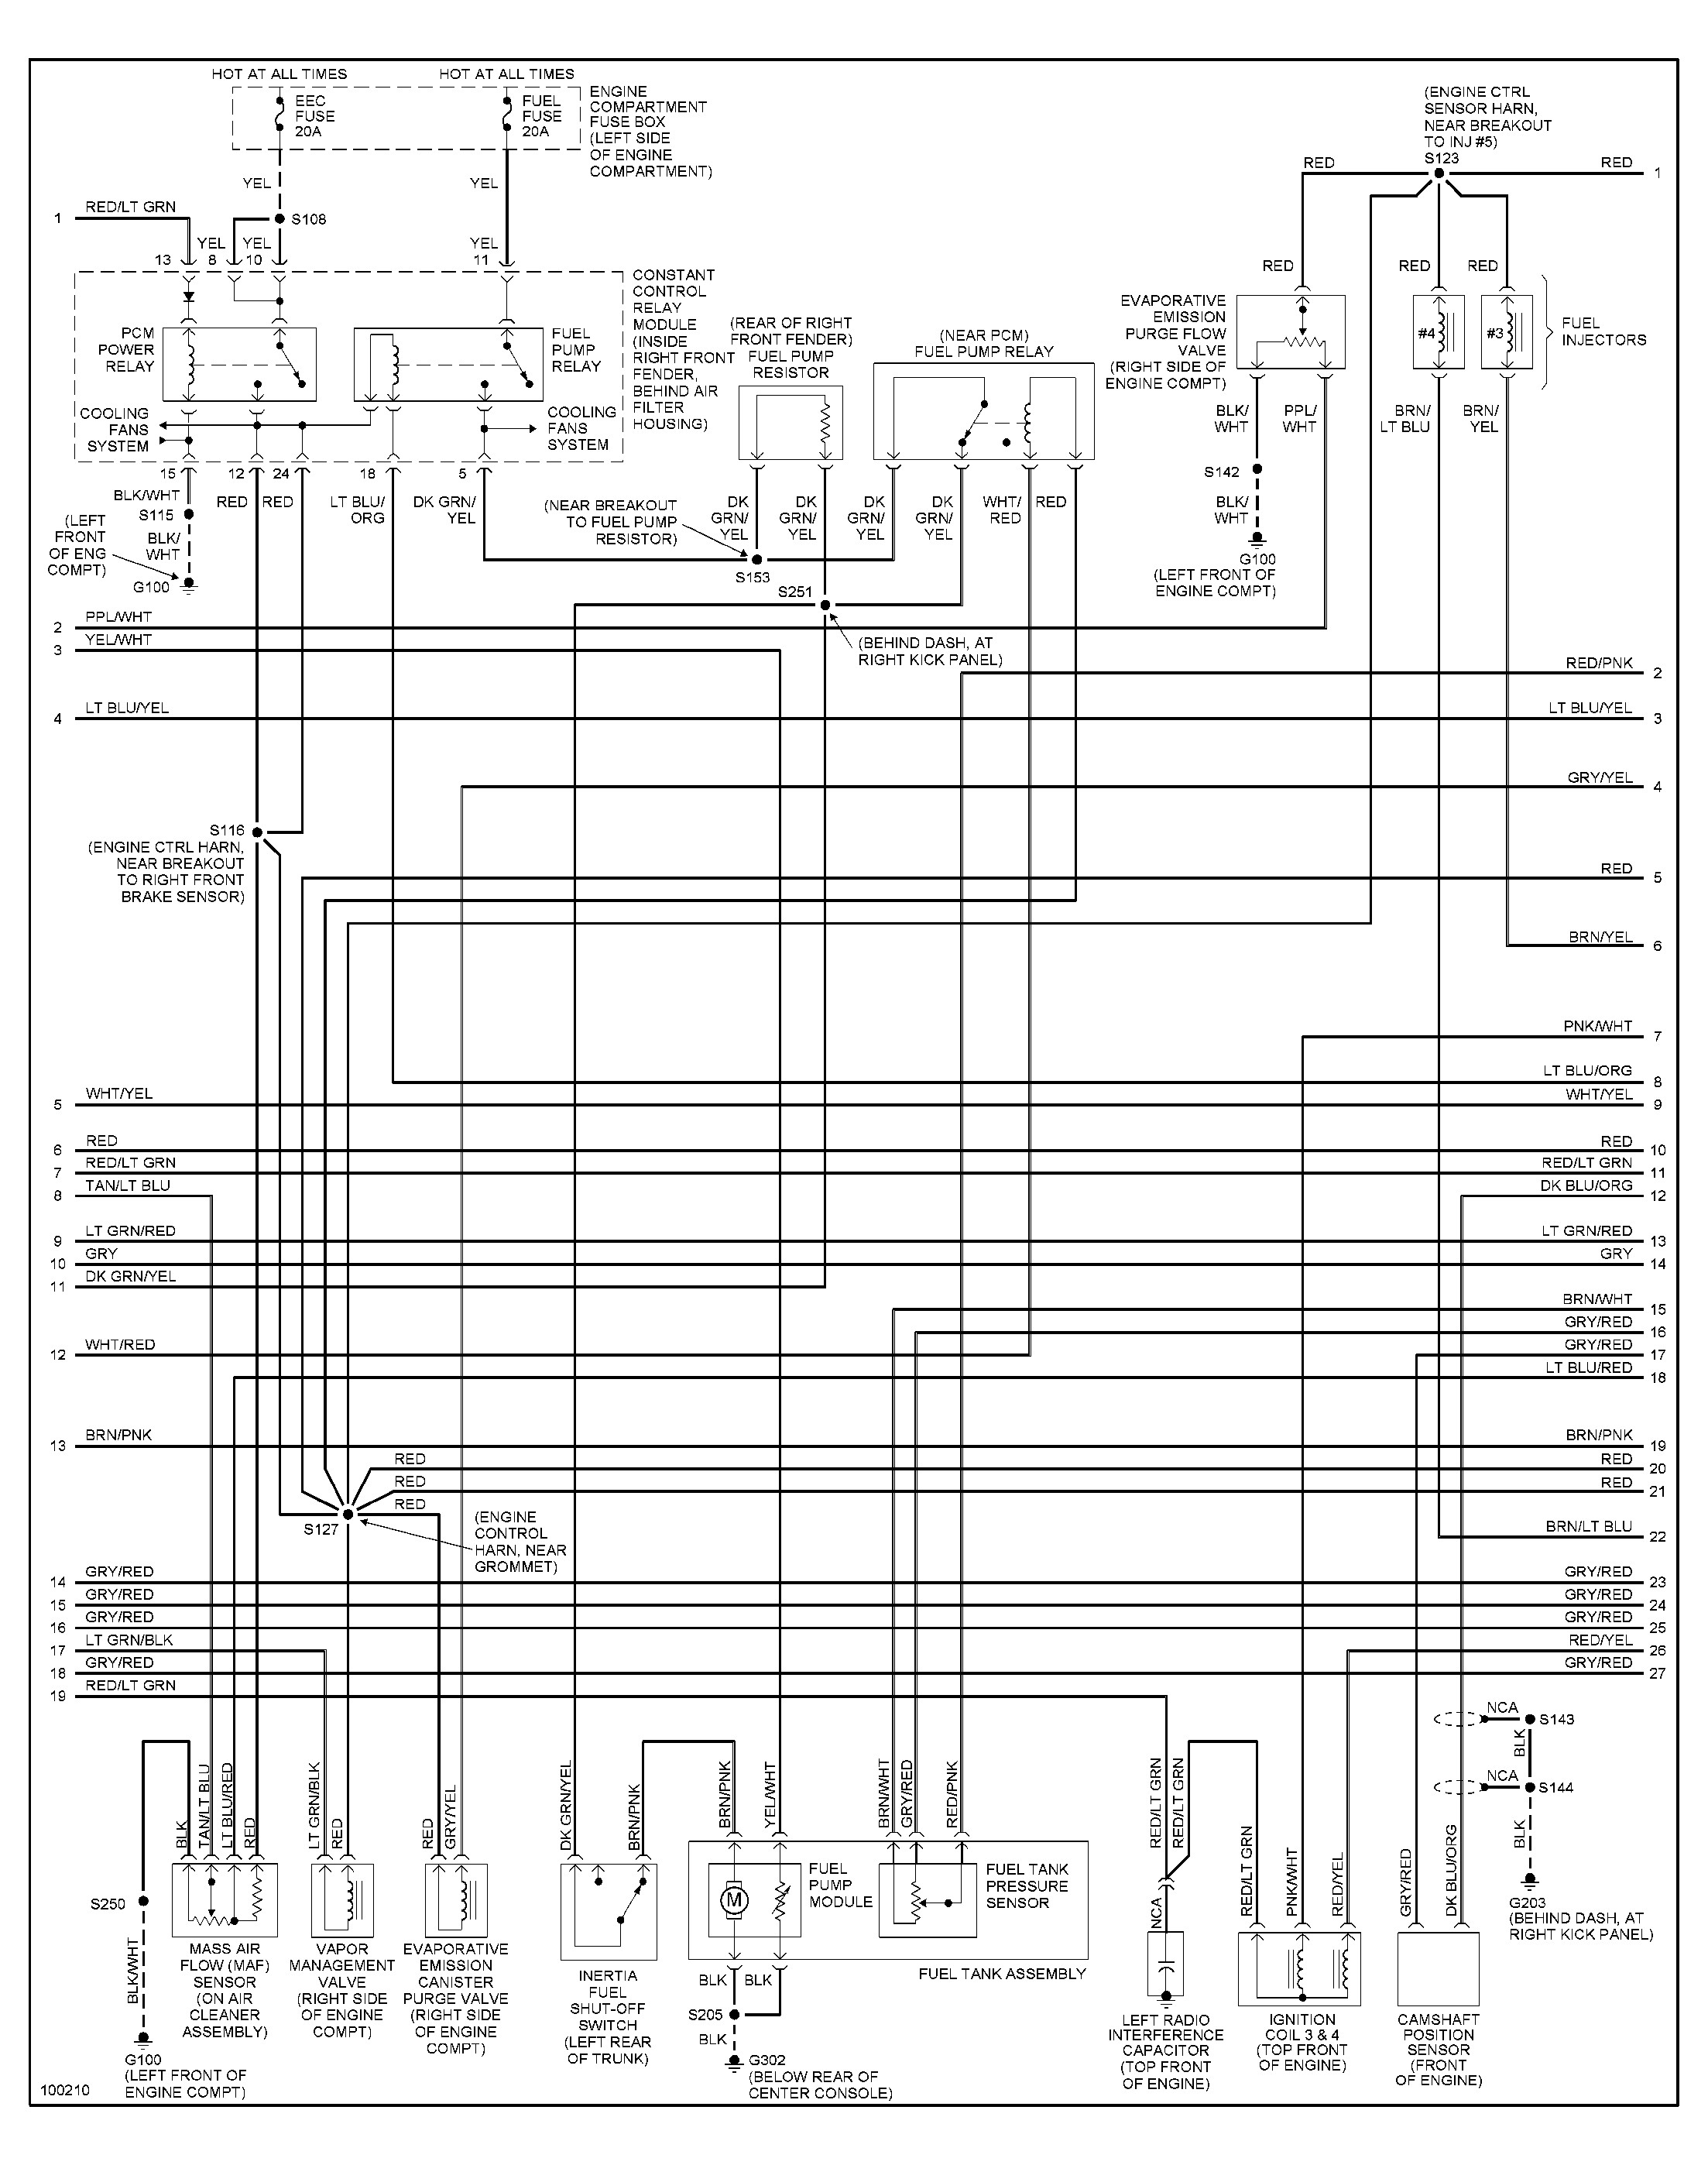 2006 ford Fusion Engine Diagram ford Mustang Gt 98 Fuel Pump Not Working Tried Checking at 1998 Of 2006 ford Fusion Engine Diagram